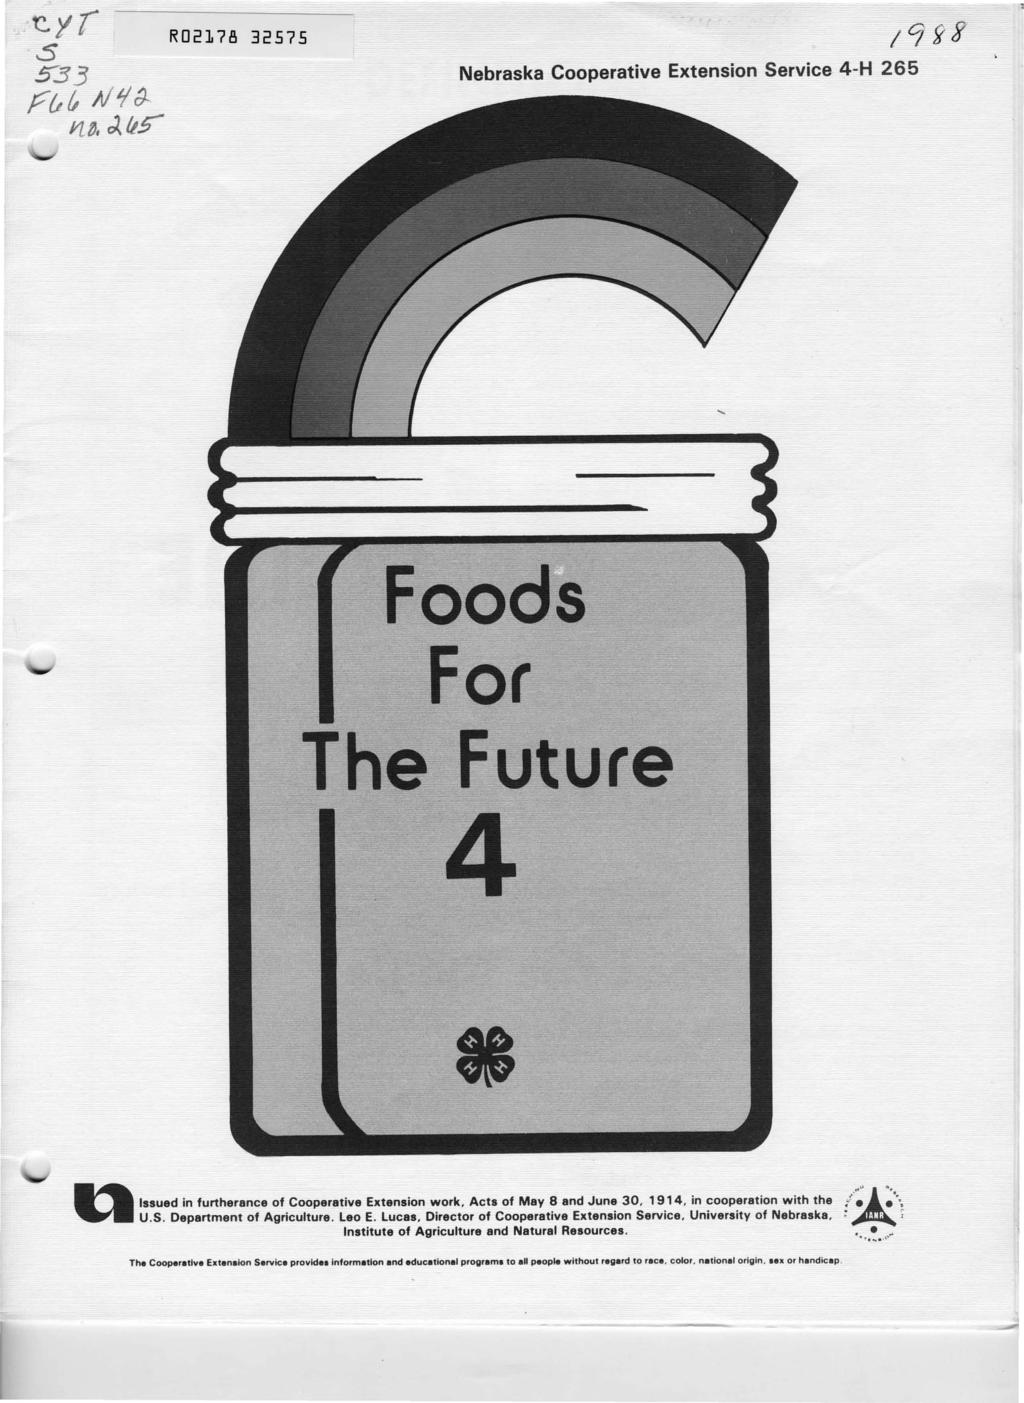 RD2178 32575 Nebraska Cooperative Extension Service 4-H 265 Foods For The Future 4 " ~ Institute of Agriculture and Natural Resources.,.